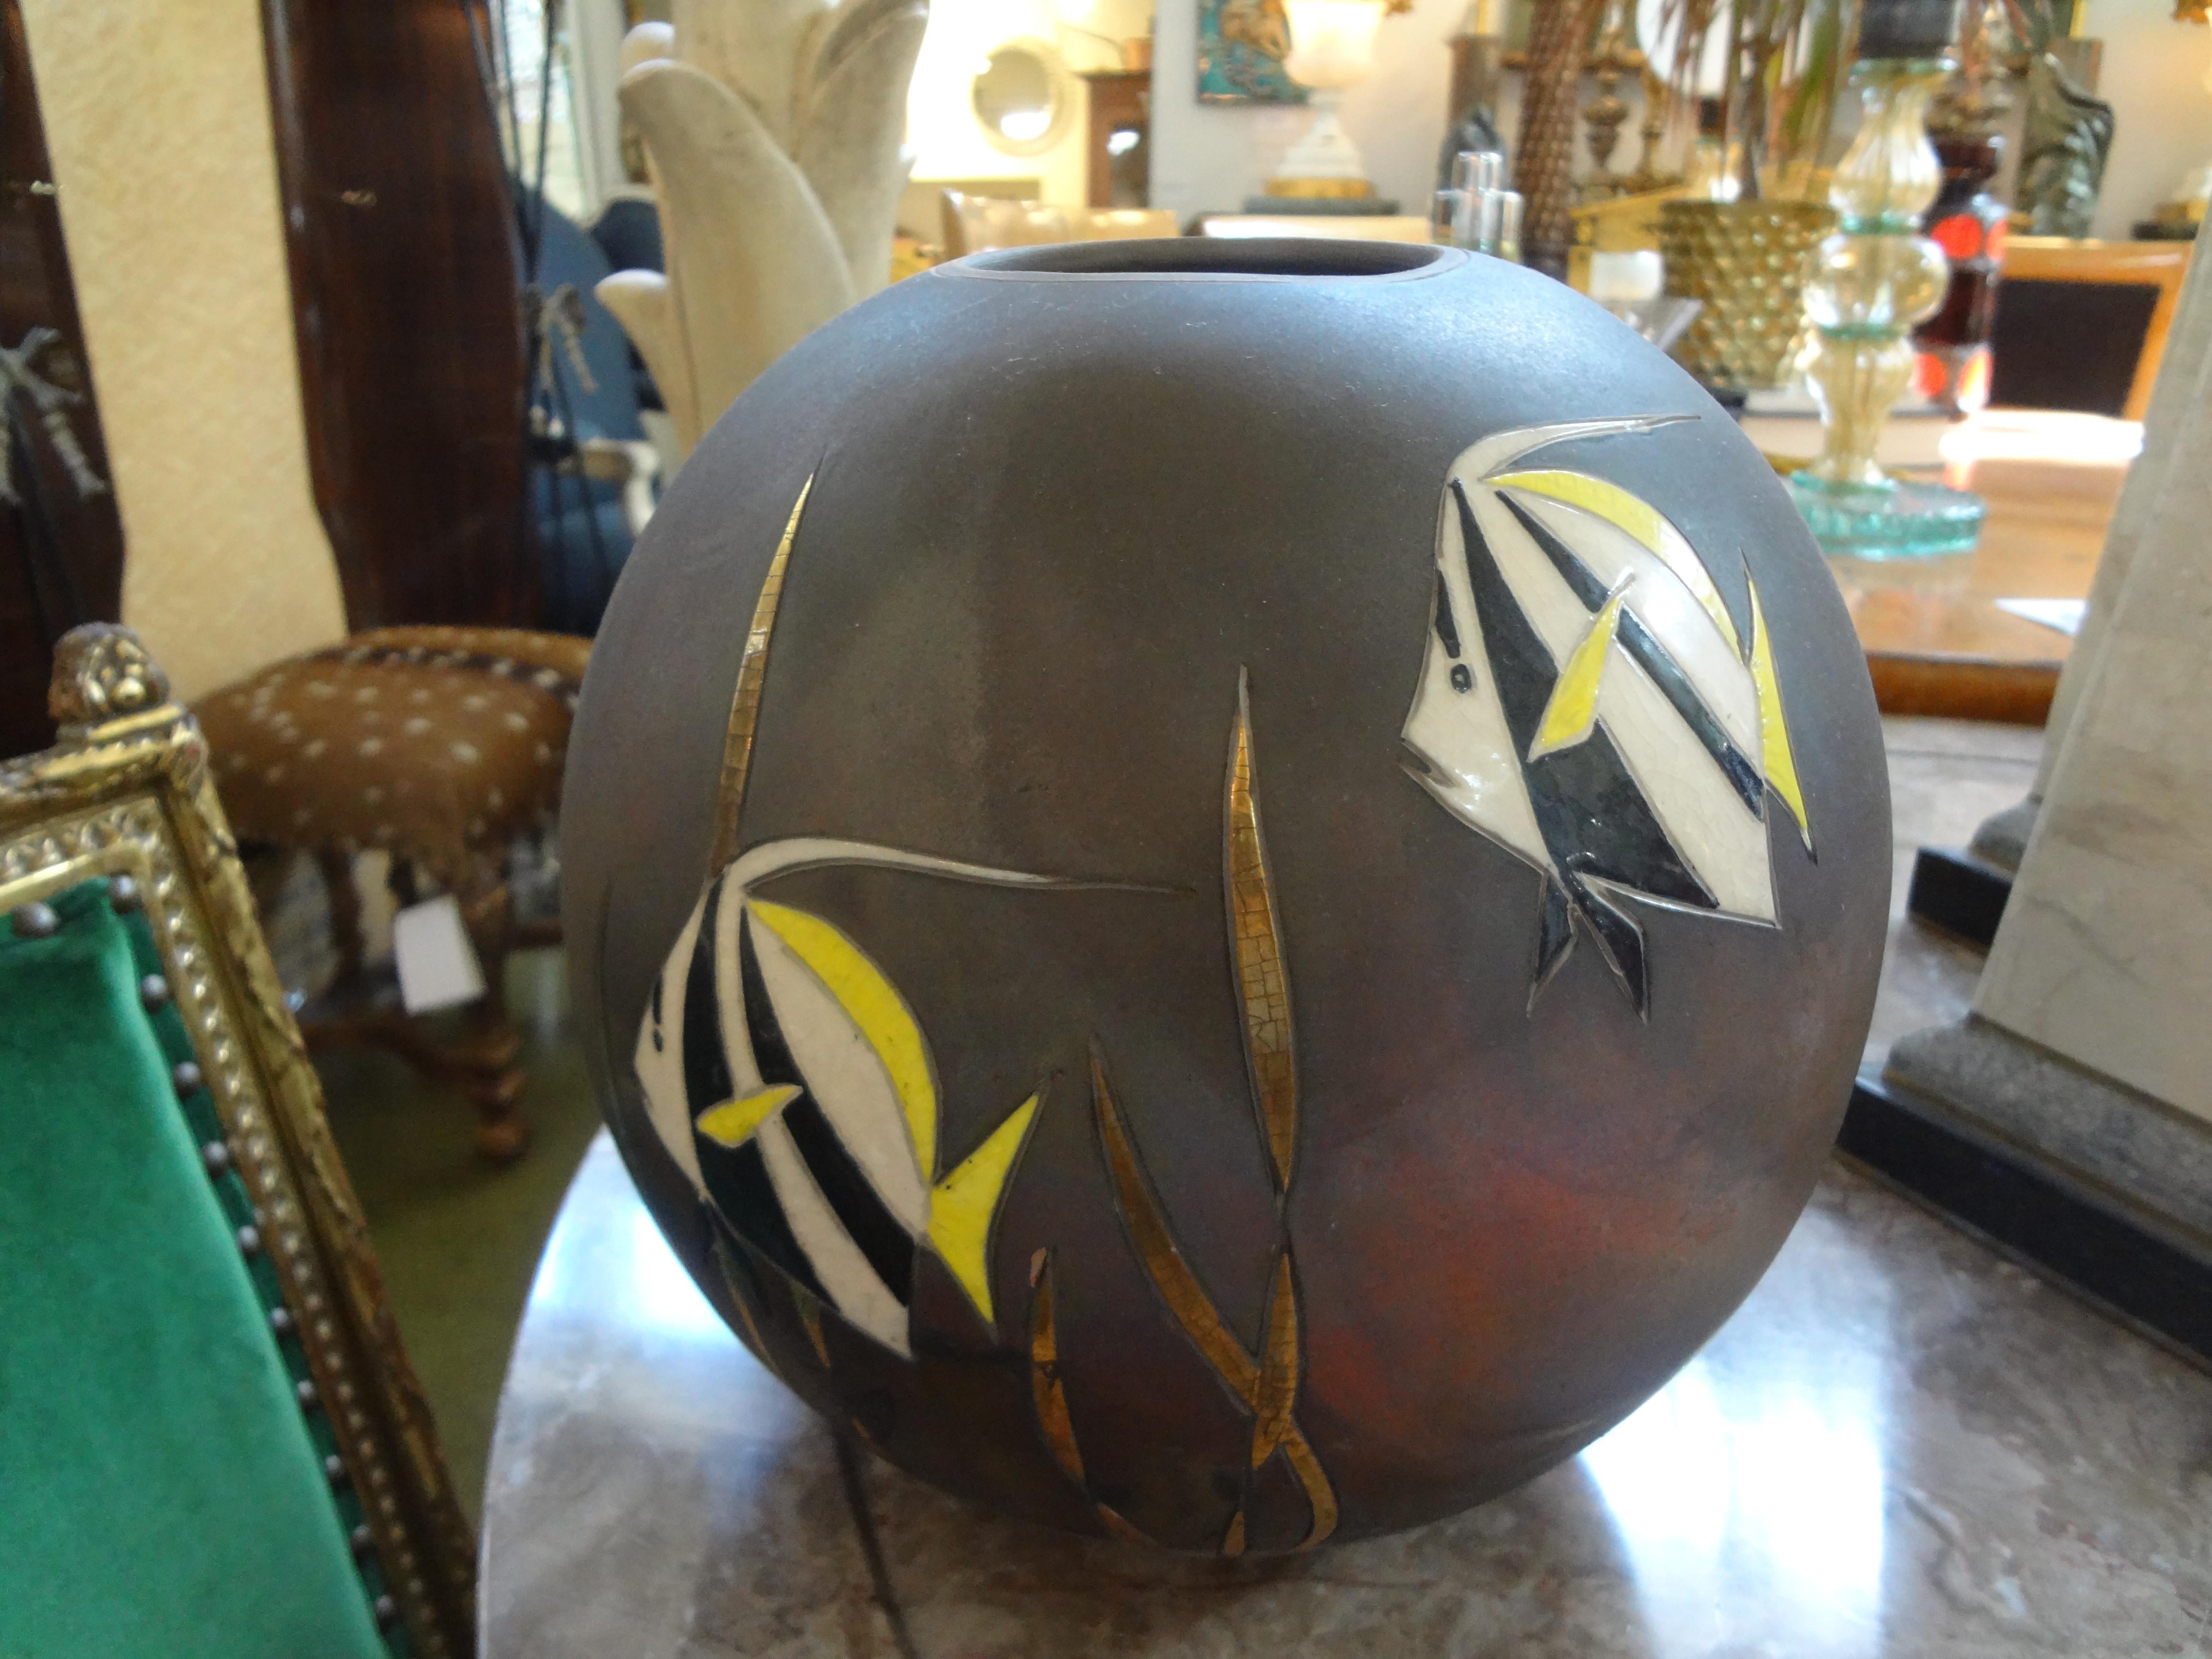 Stunning vintage raku pottery vase by Tom and Nancy Giusti decorated with colorfully decorated angel fish and seaweed.